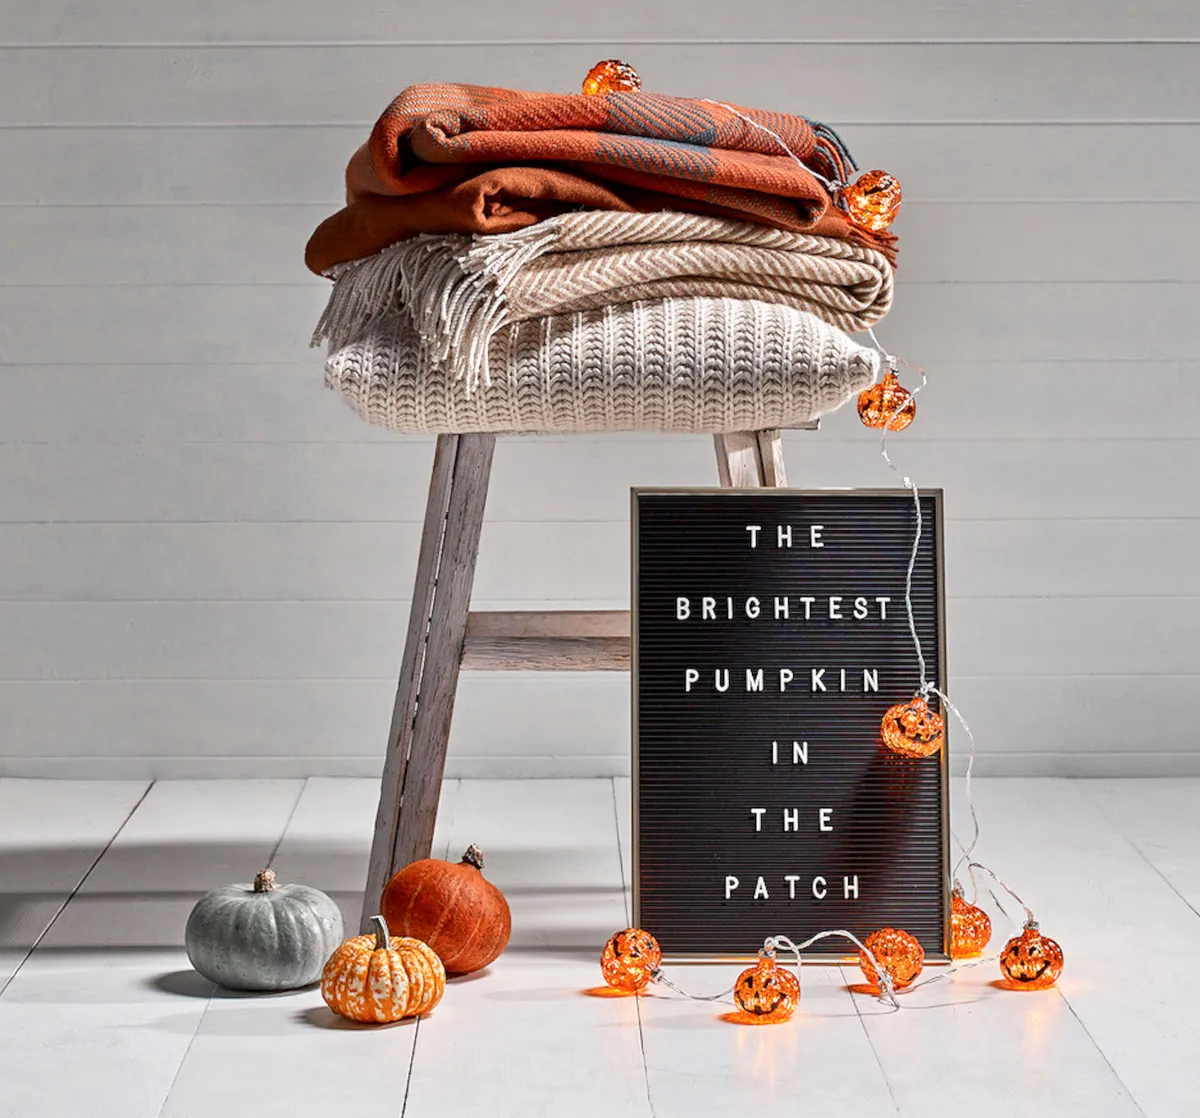 A string of illuminated pumpkin fairy lights alongside a washed wooden stool, woollen orange blankets and a vintage-style letter board.